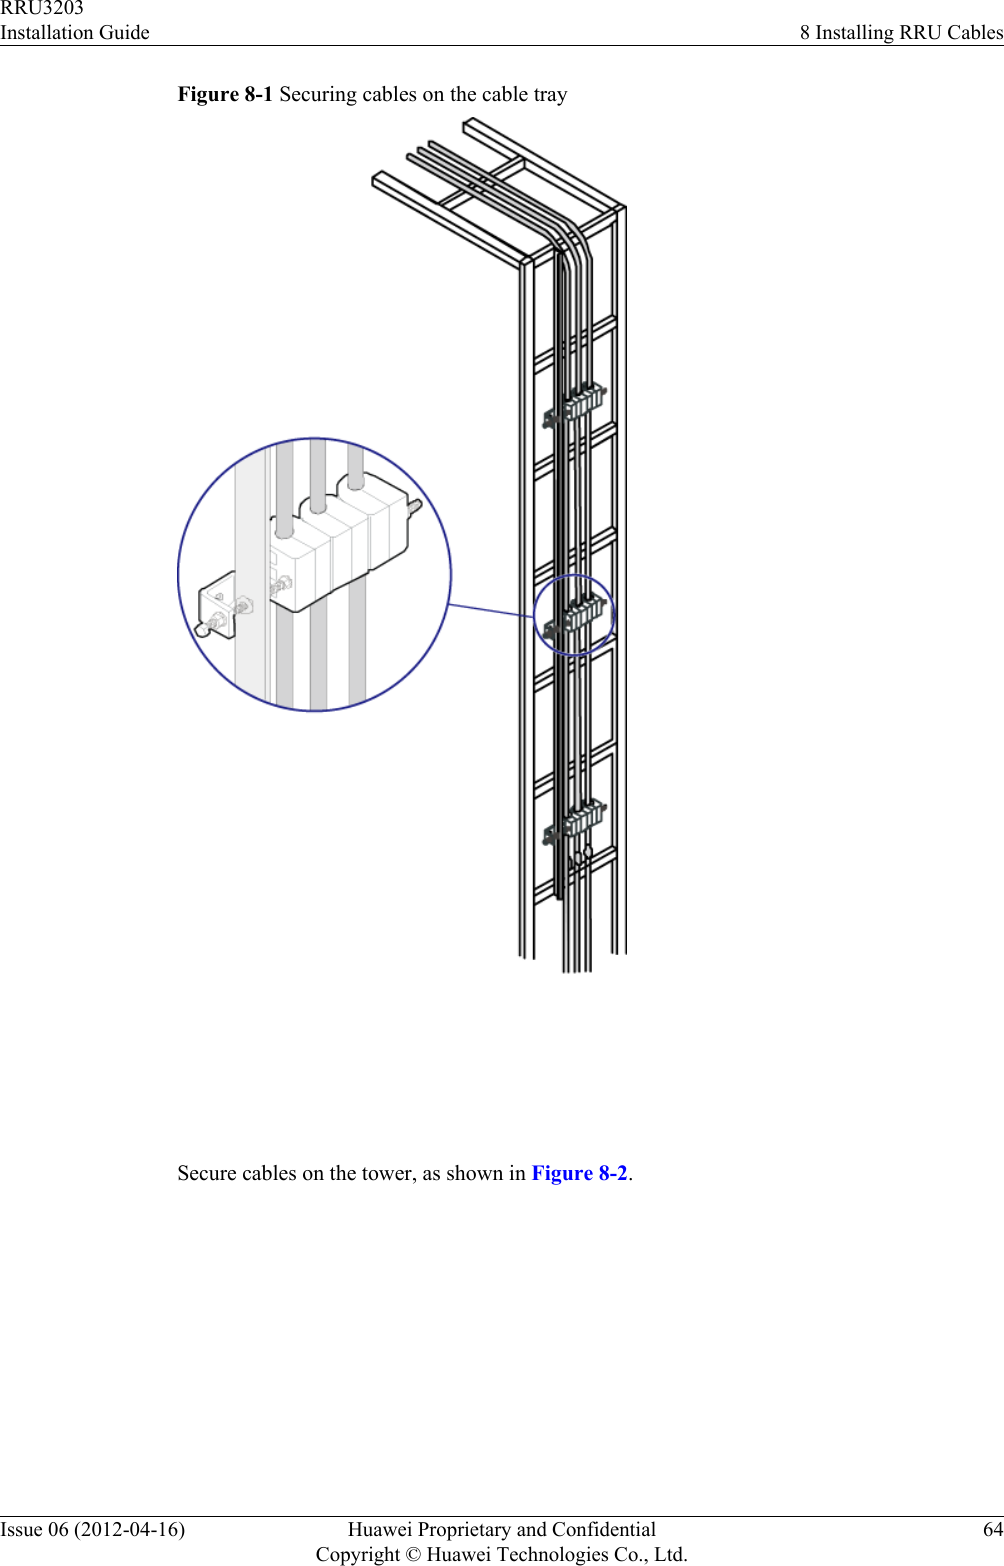 Figure 8-1 Securing cables on the cable tray Secure cables on the tower, as shown in Figure 8-2.RRU3203Installation Guide 8 Installing RRU CablesIssue 06 (2012-04-16) Huawei Proprietary and ConfidentialCopyright © Huawei Technologies Co., Ltd.64